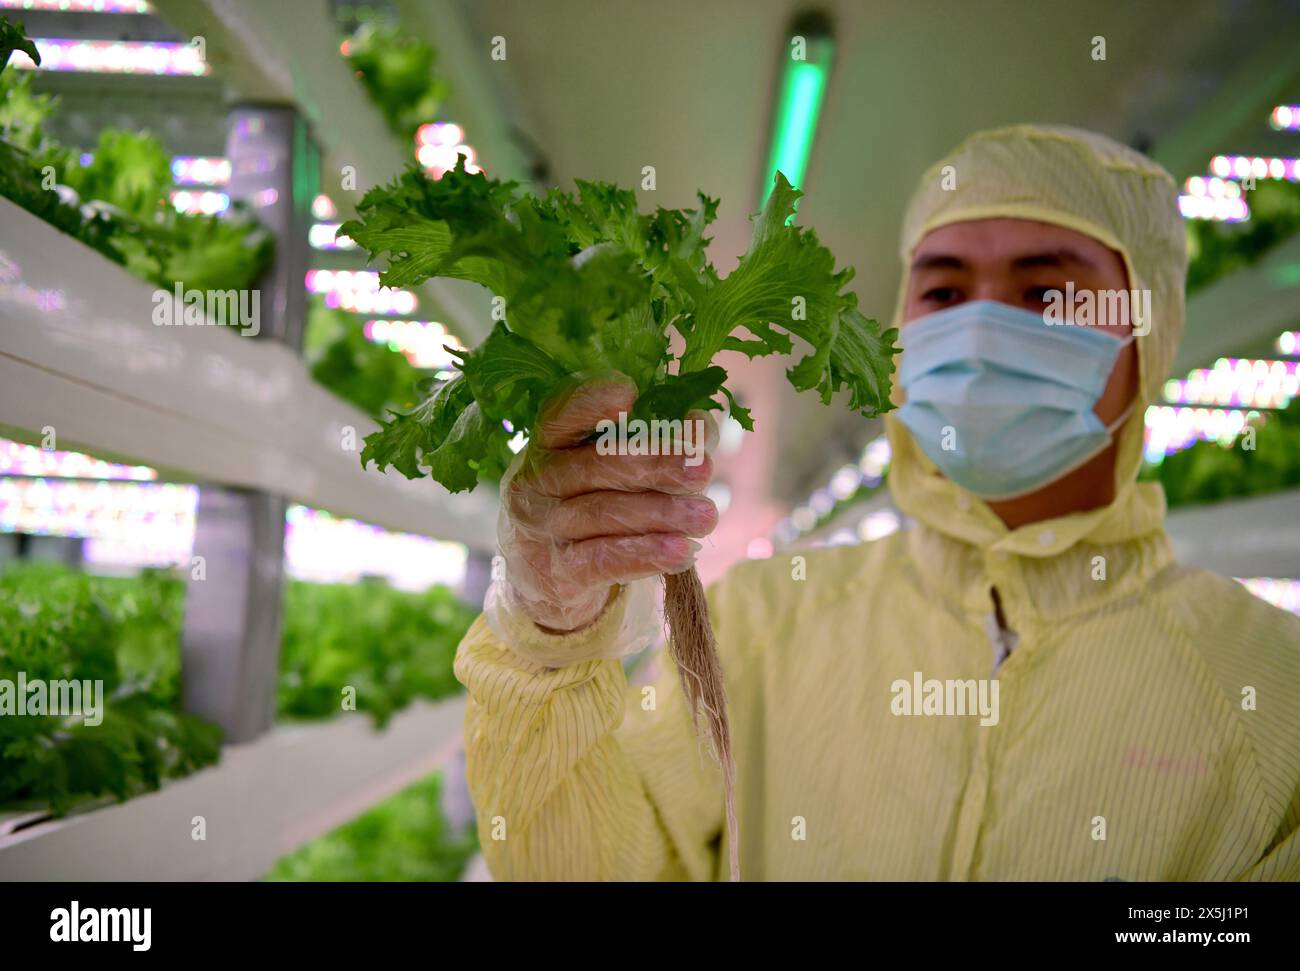 (240510) -- QUANZHOU, May 10, 2024 (Xinhua) -- A staff member displays a lettuce seedling at Sananbio plant factory in Anxi County of Quanzhou, southeast China's Fujian Province, May 8, 2024. Sananbio, a joint venture between the Institute of Botany under the Chinese Academy of Sciences and Sanan Group, a Chinese optoelectronics giant, has developed an intelligent plant cultivating system integrating research and development results with LED lighting technology, and applied it to a new-generation automated plant factory. The plant factory can achieve a daily industrial production of 1.5 tonn Stock Photo